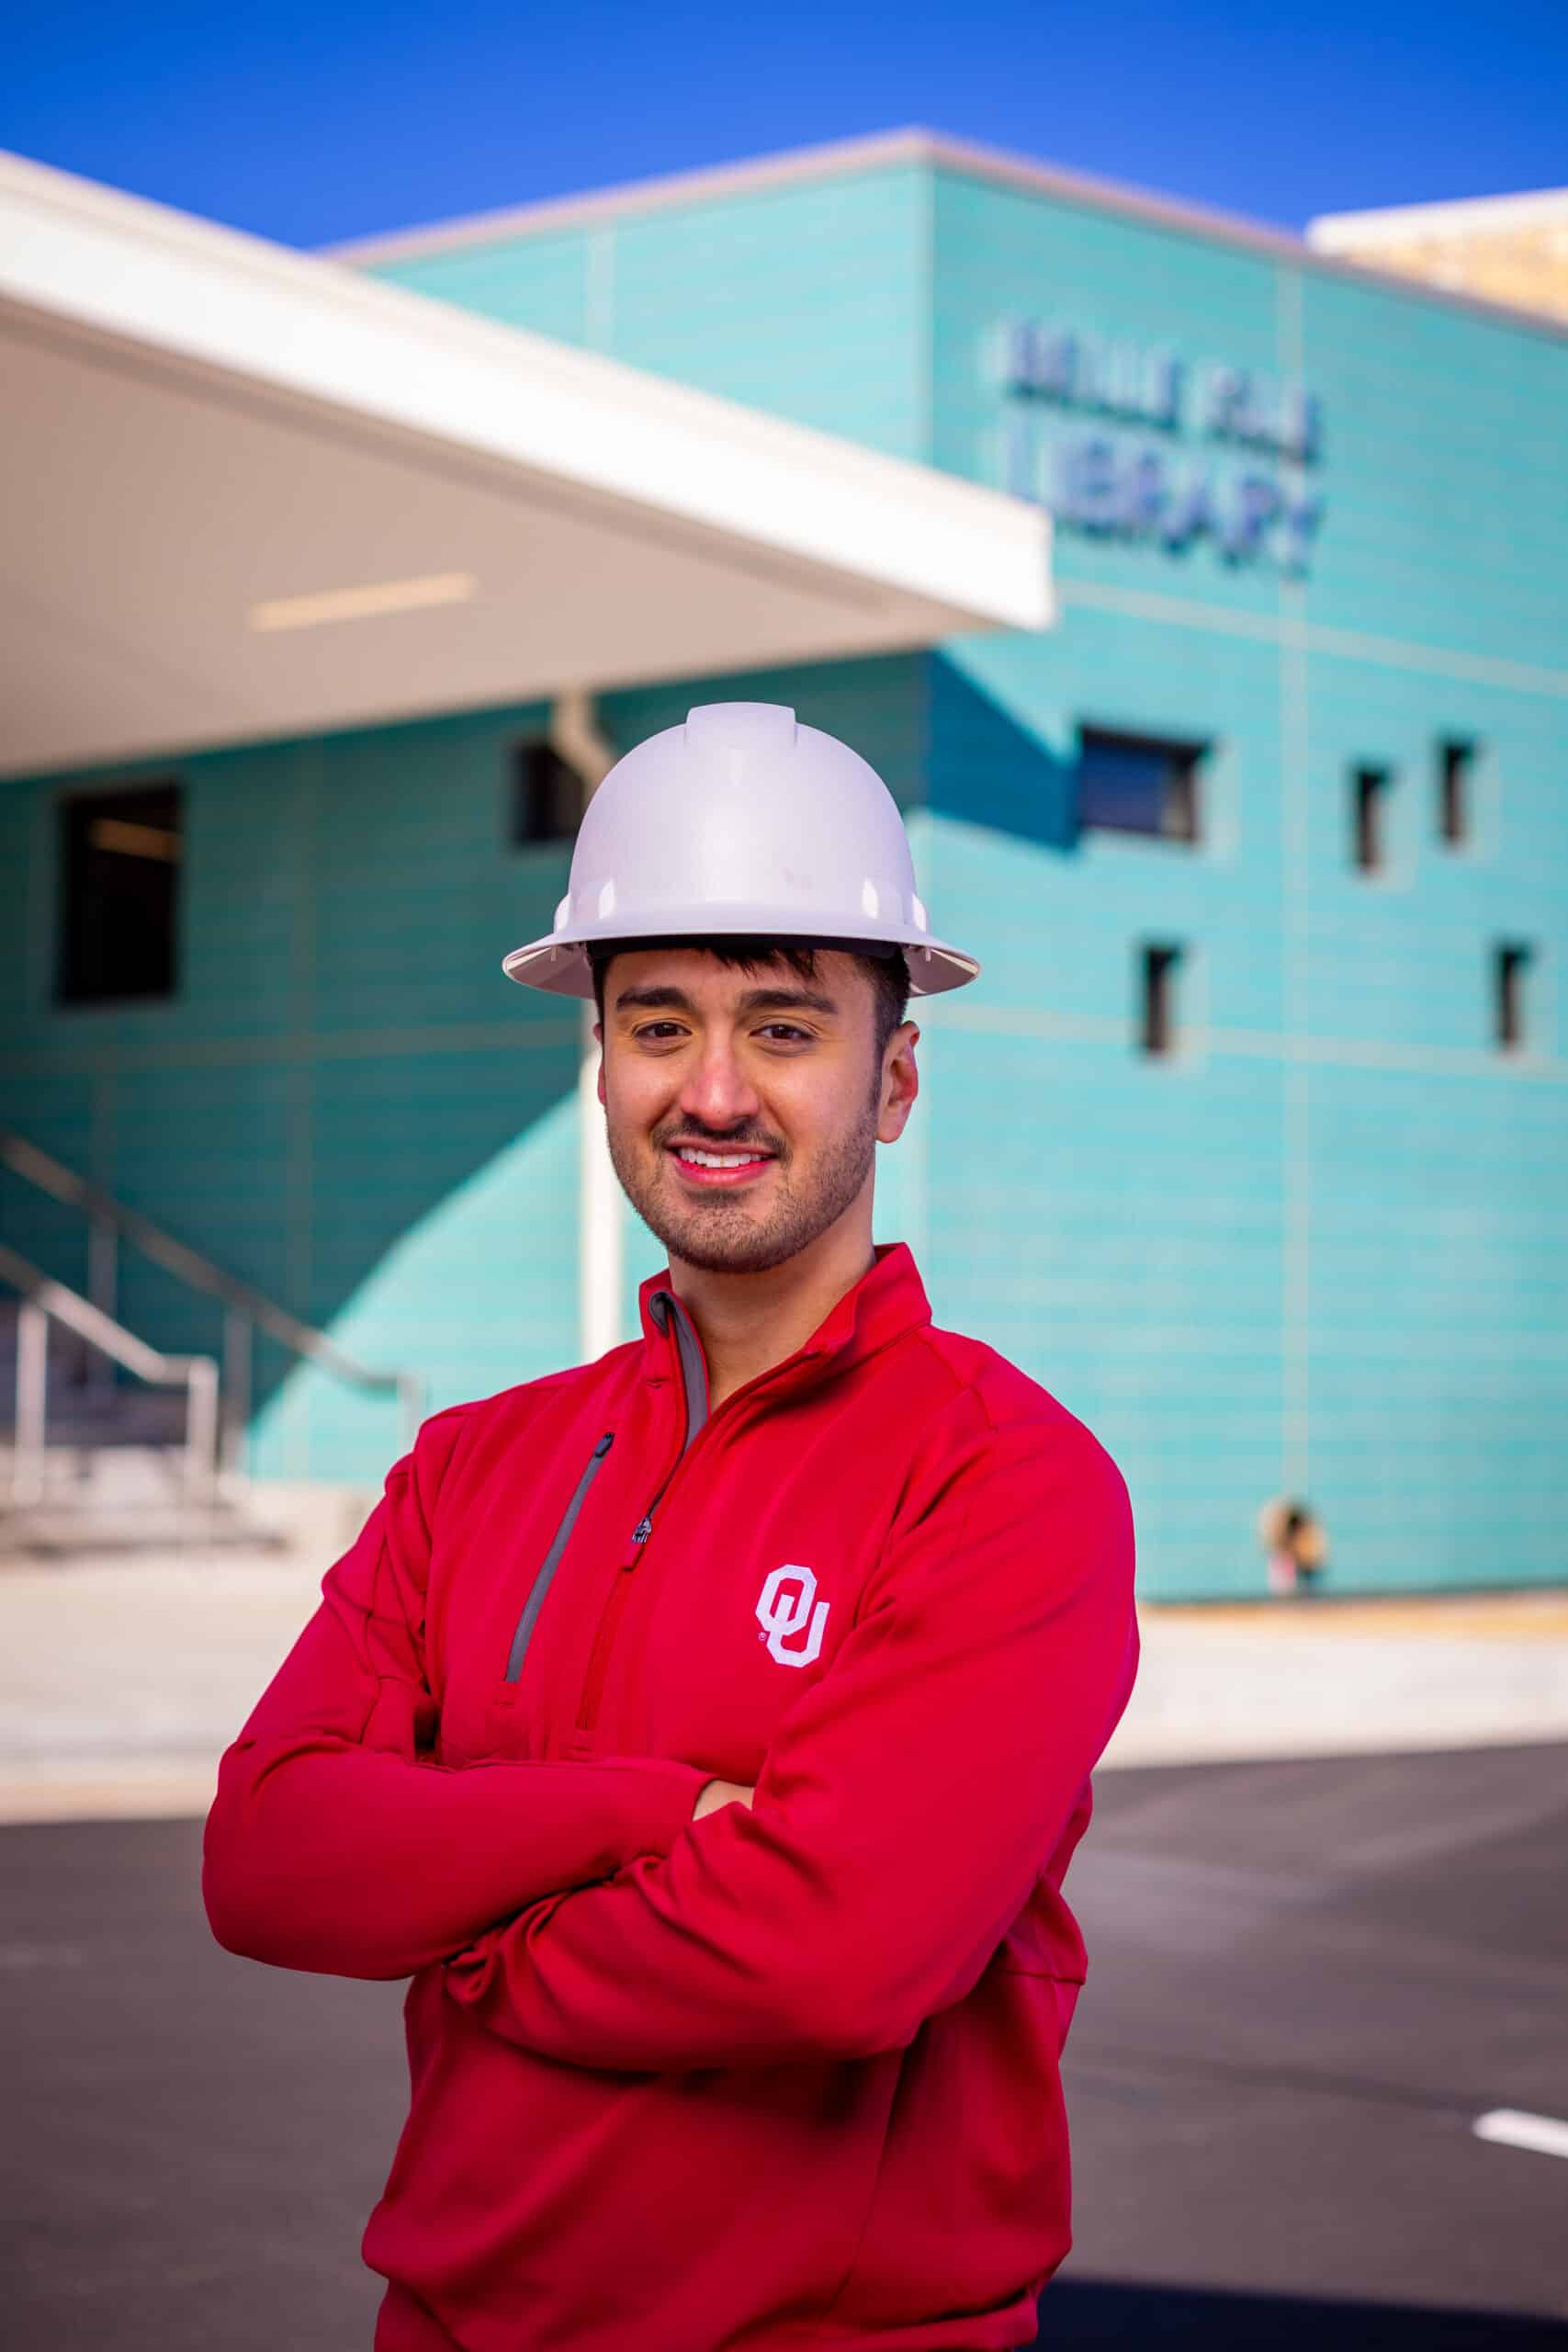 a student wearing a construction hat standing in front of a building